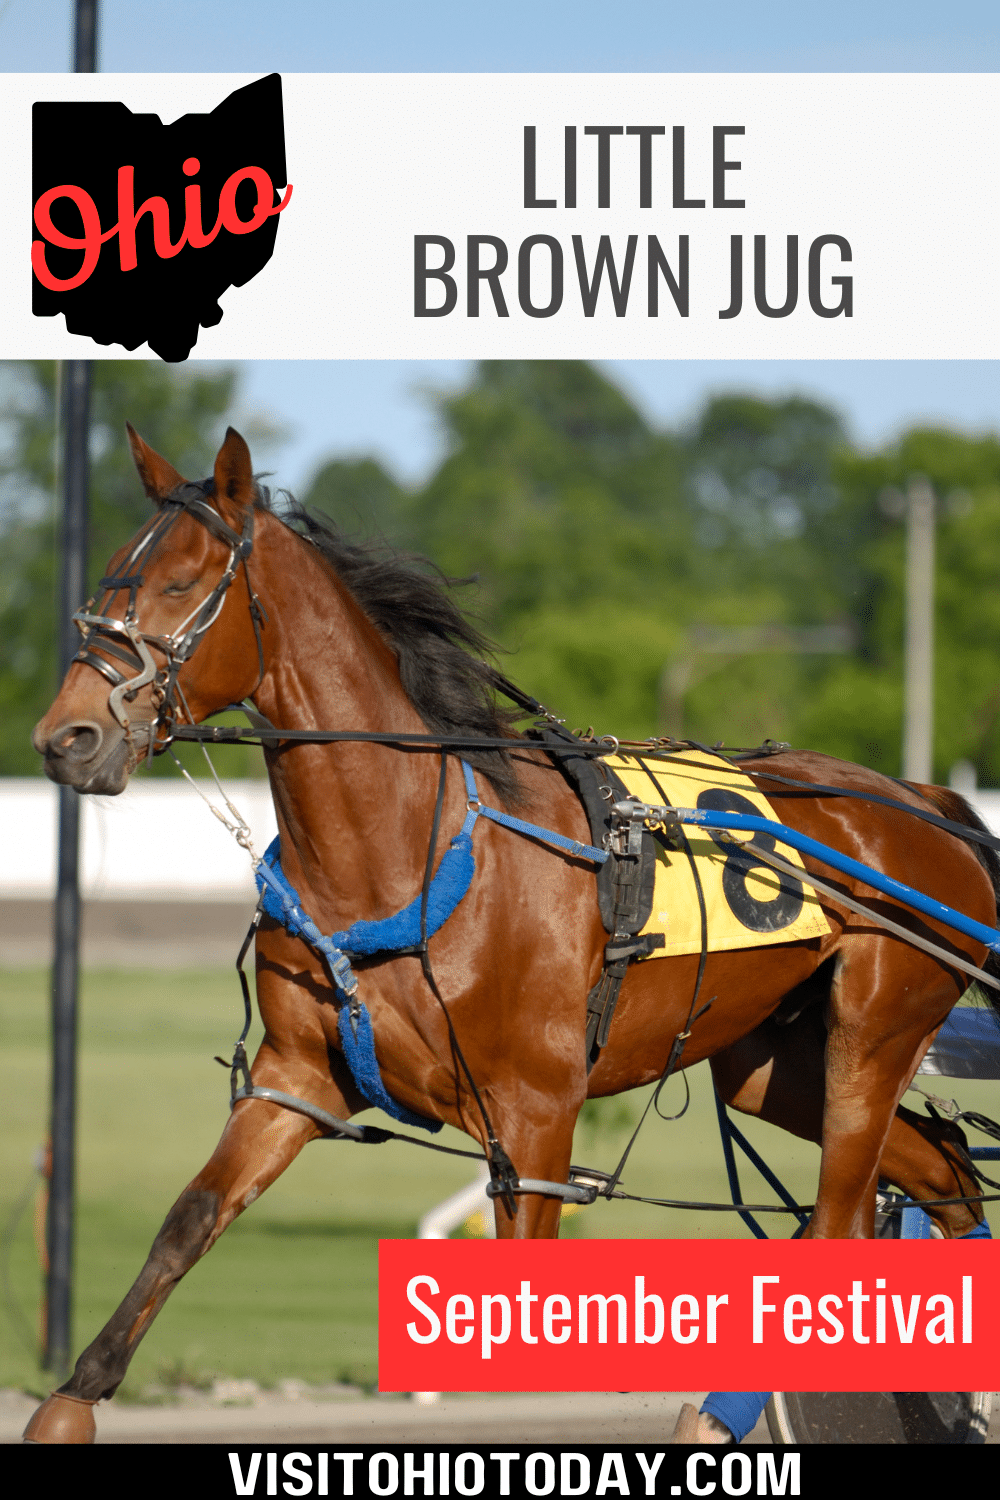 The Little Brown Jug is an annual set of harness races held towards the end of the Delaware County Fair. Held on Thursday September 21, 2023.